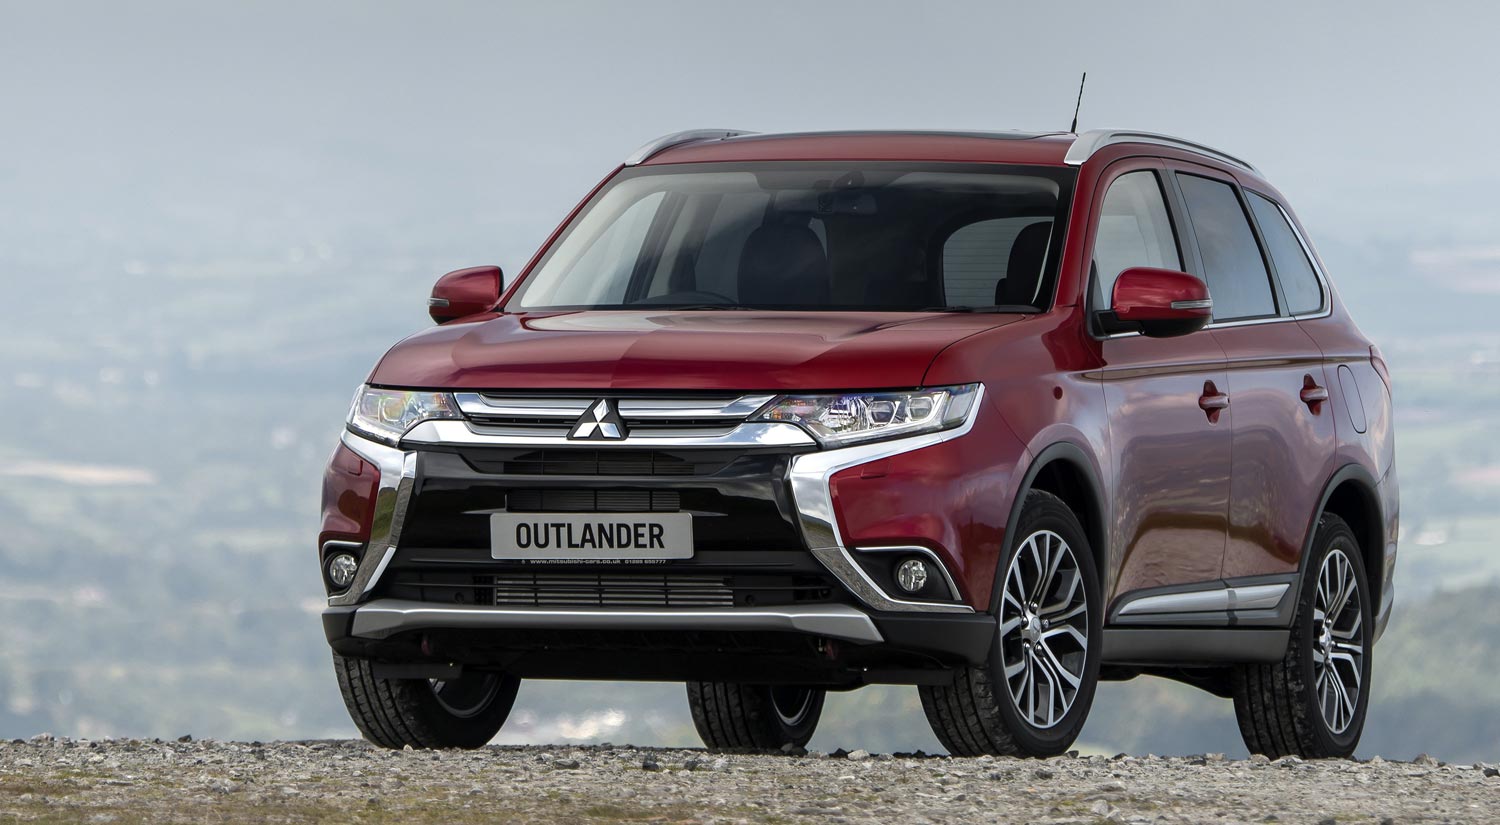 The Latest Mitsubishi Outlander 4x4 Diesel Review